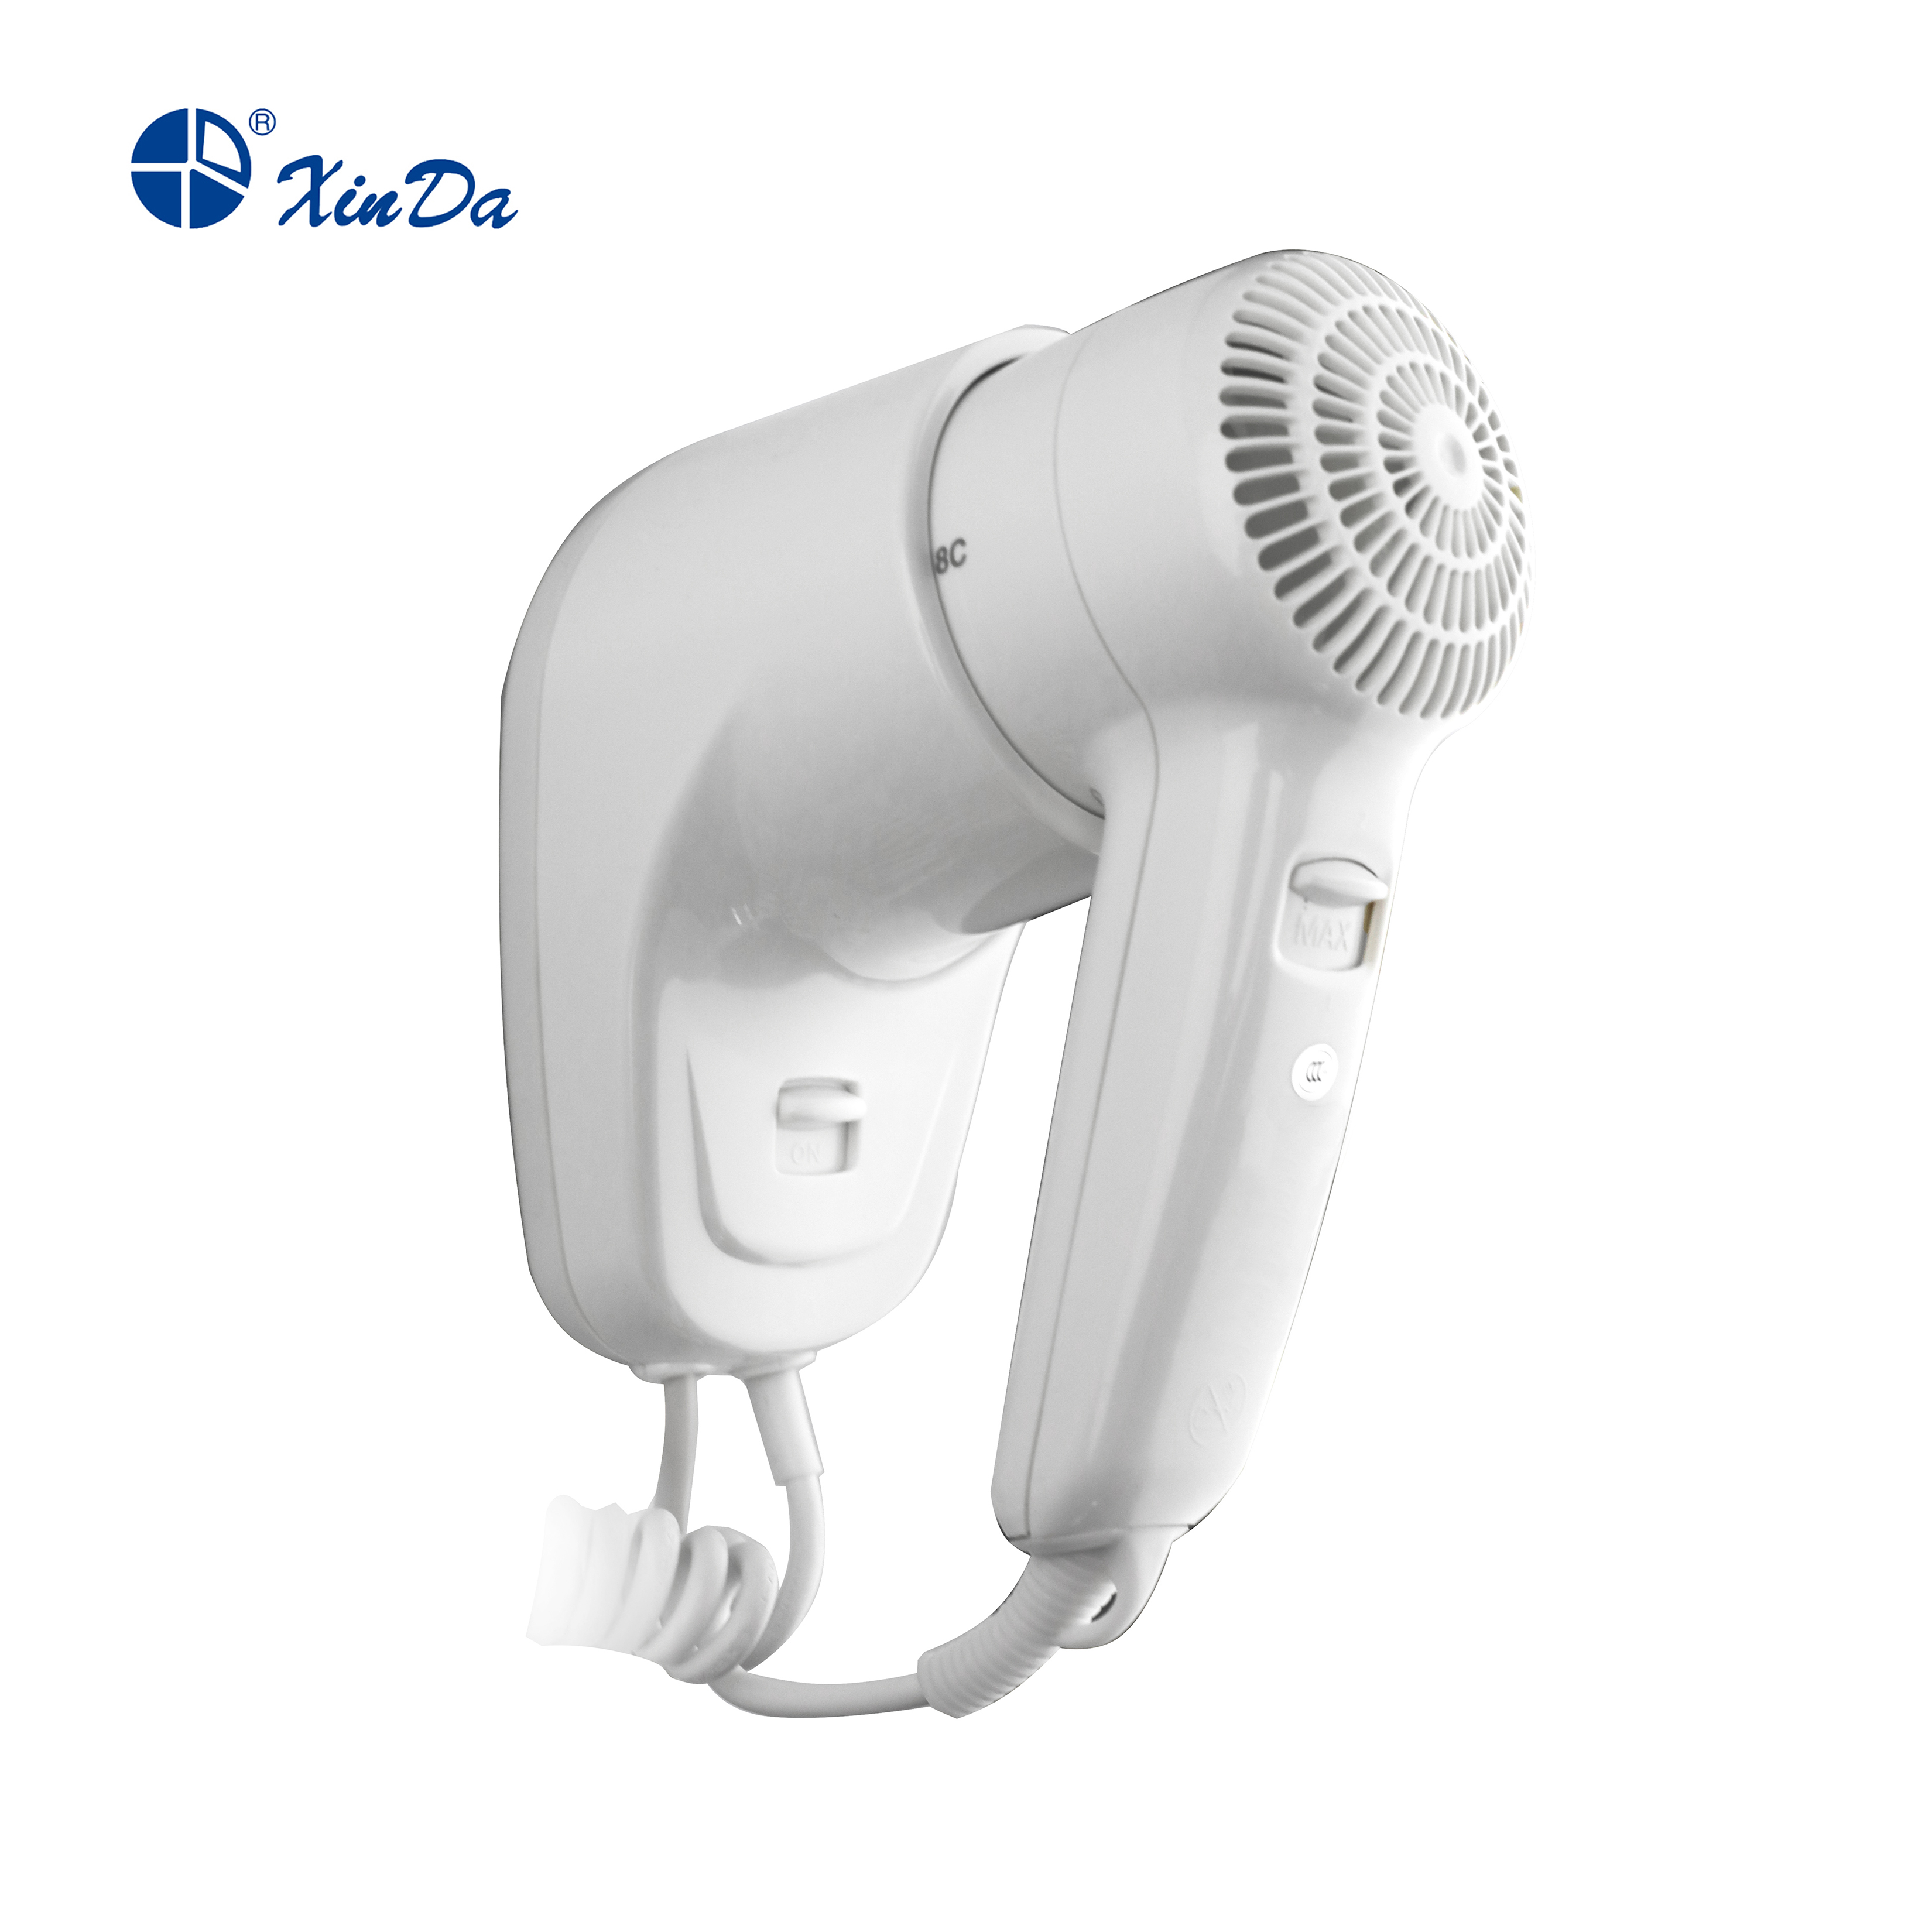 High Quality Hotel Hair Blow Dryers Negative Ionic Blowdryer Portable BLDC Motor Hairdryers Professional Hair Dryer